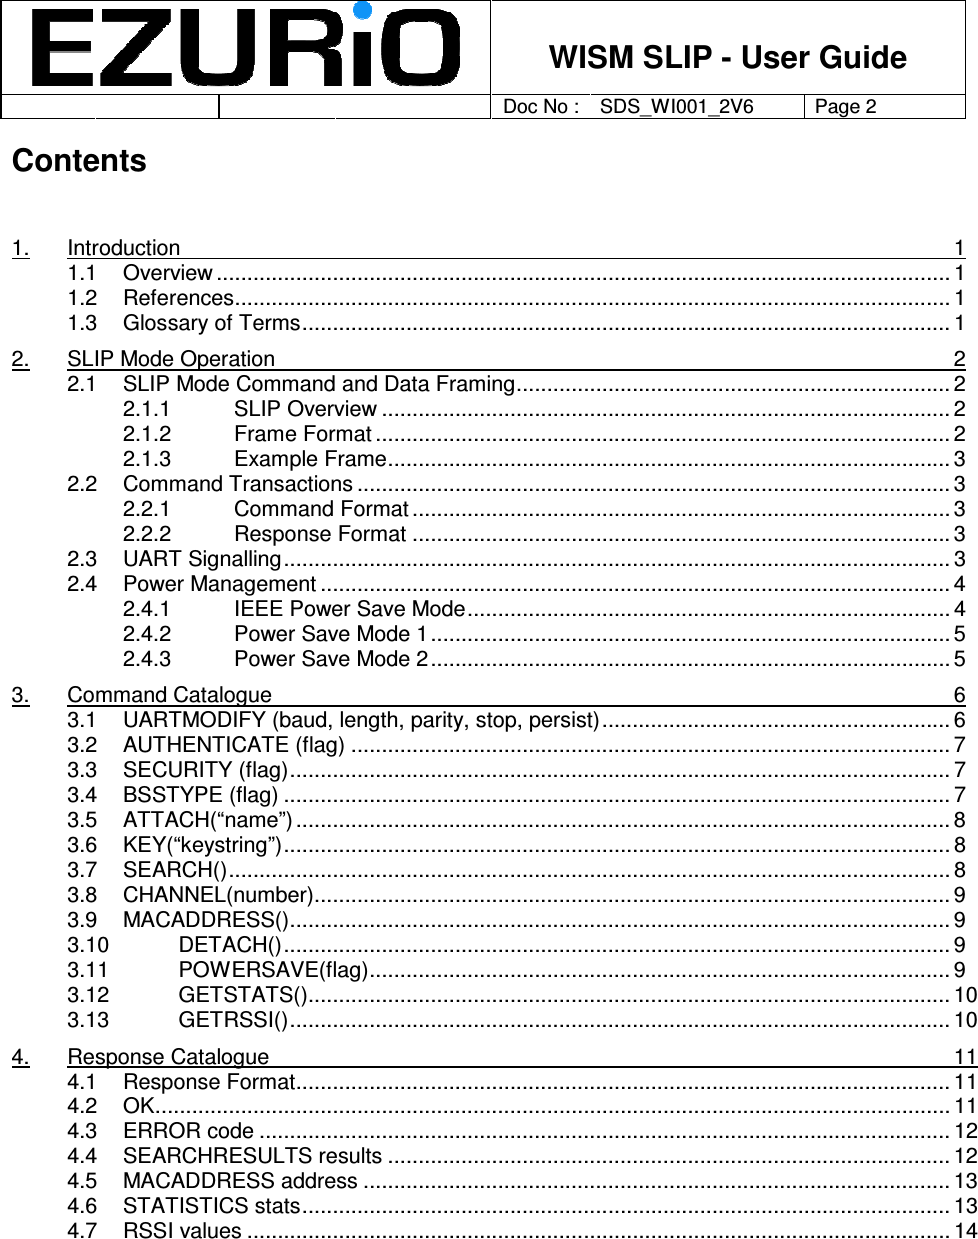    WISM SLIP - User Guide         Doc No : SDS_WI001_2V6 Page 2     Contents   1. Introduction  1 1.1 Overview ........................................................................................................................ 1 1.2 References..................................................................................................................... 1 1.3 Glossary of Terms.......................................................................................................... 1 2. SLIP Mode Operation  2 2.1 SLIP Mode Command and Data Framing....................................................................... 2 2.1.1 SLIP Overview ............................................................................................. 2 2.1.2 Frame Format .............................................................................................. 2 2.1.3 Example Frame............................................................................................ 3 2.2 Command Transactions ................................................................................................. 3 2.2.1 Command Format ........................................................................................ 3 2.2.2 Response Format ........................................................................................ 3 2.3 UART Signalling............................................................................................................. 3 2.4 Power Management ....................................................................................................... 4 2.4.1 IEEE Power Save Mode............................................................................... 4 2.4.2 Power Save Mode 1..................................................................................... 5 2.4.3 Power Save Mode 2..................................................................................... 5 3. Command Catalogue  6 3.1 UARTMODIFY (baud, length, parity, stop, persist)......................................................... 6 3.2 AUTHENTICATE (flag) .................................................................................................. 7 3.3 SECURITY (flag)............................................................................................................ 7 3.4 BSSTYPE (flag) ............................................................................................................. 7 3.5 ATTACH(“name”) ........................................................................................................... 8 3.6 KEY(“keystring”)............................................................................................................. 8 3.7 SEARCH()...................................................................................................................... 8 3.8 CHANNEL(number)........................................................................................................ 9 3.9 MACADDRESS()............................................................................................................ 9 3.10 DETACH()............................................................................................................. 9 3.11 POWERSAVE(flag)............................................................................................... 9 3.12 GETSTATS()......................................................................................................... 10 3.13 GETRSSI()............................................................................................................ 10 4. Response Catalogue  11 4.1 Response Format........................................................................................................... 11 4.2 OK.................................................................................................................................. 11 4.3 ERROR code ................................................................................................................. 12 4.4 SEARCHRESULTS results ............................................................................................ 12 4.5 MACADDRESS address ................................................................................................ 13 4.6 STATISTICS stats.......................................................................................................... 13 4.7 RSSI values ................................................................................................................... 14  